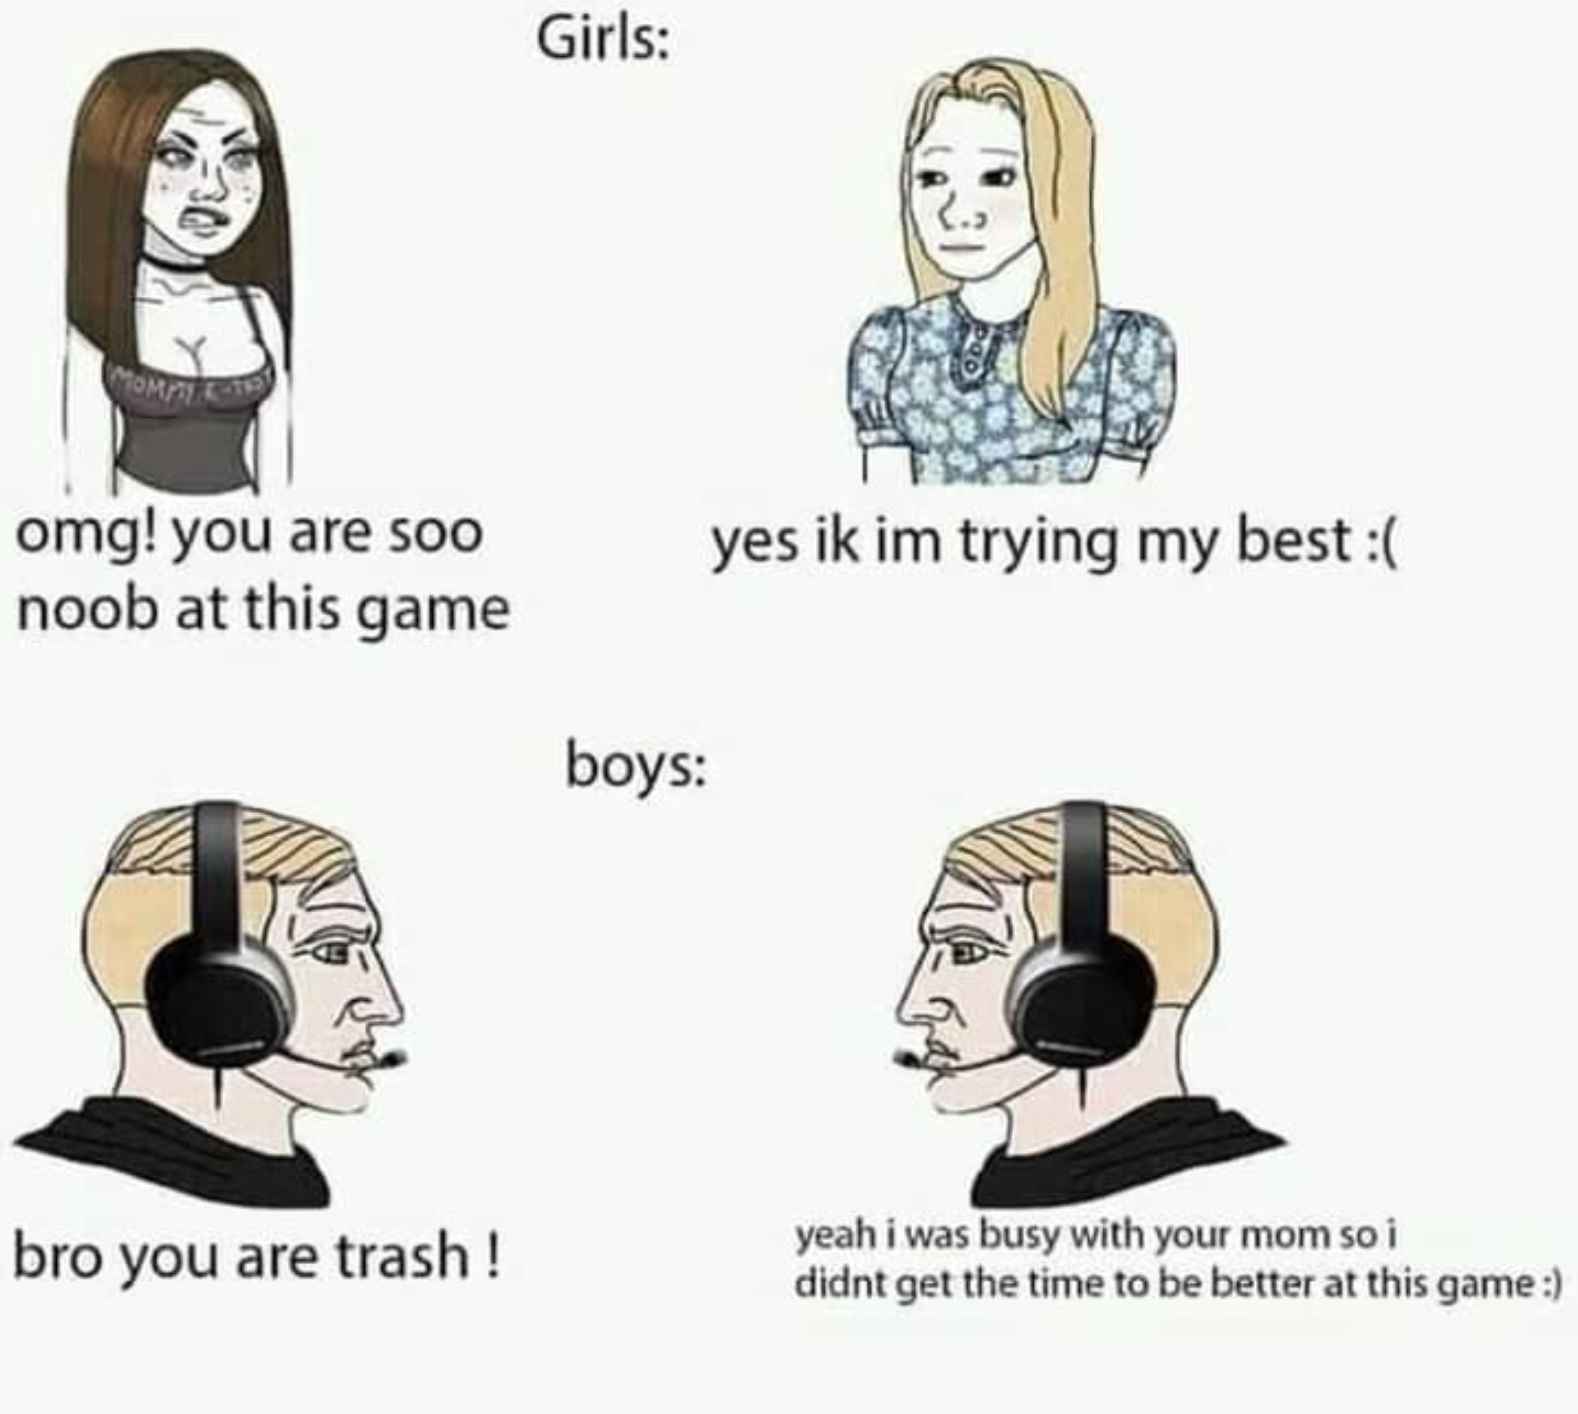 toxic gaming memes - Girls omg! you are soo noob at this game yes ik im trying my best boys bro you are trash! yeah i was busy with your mom so i didnt get the time to be better at this game